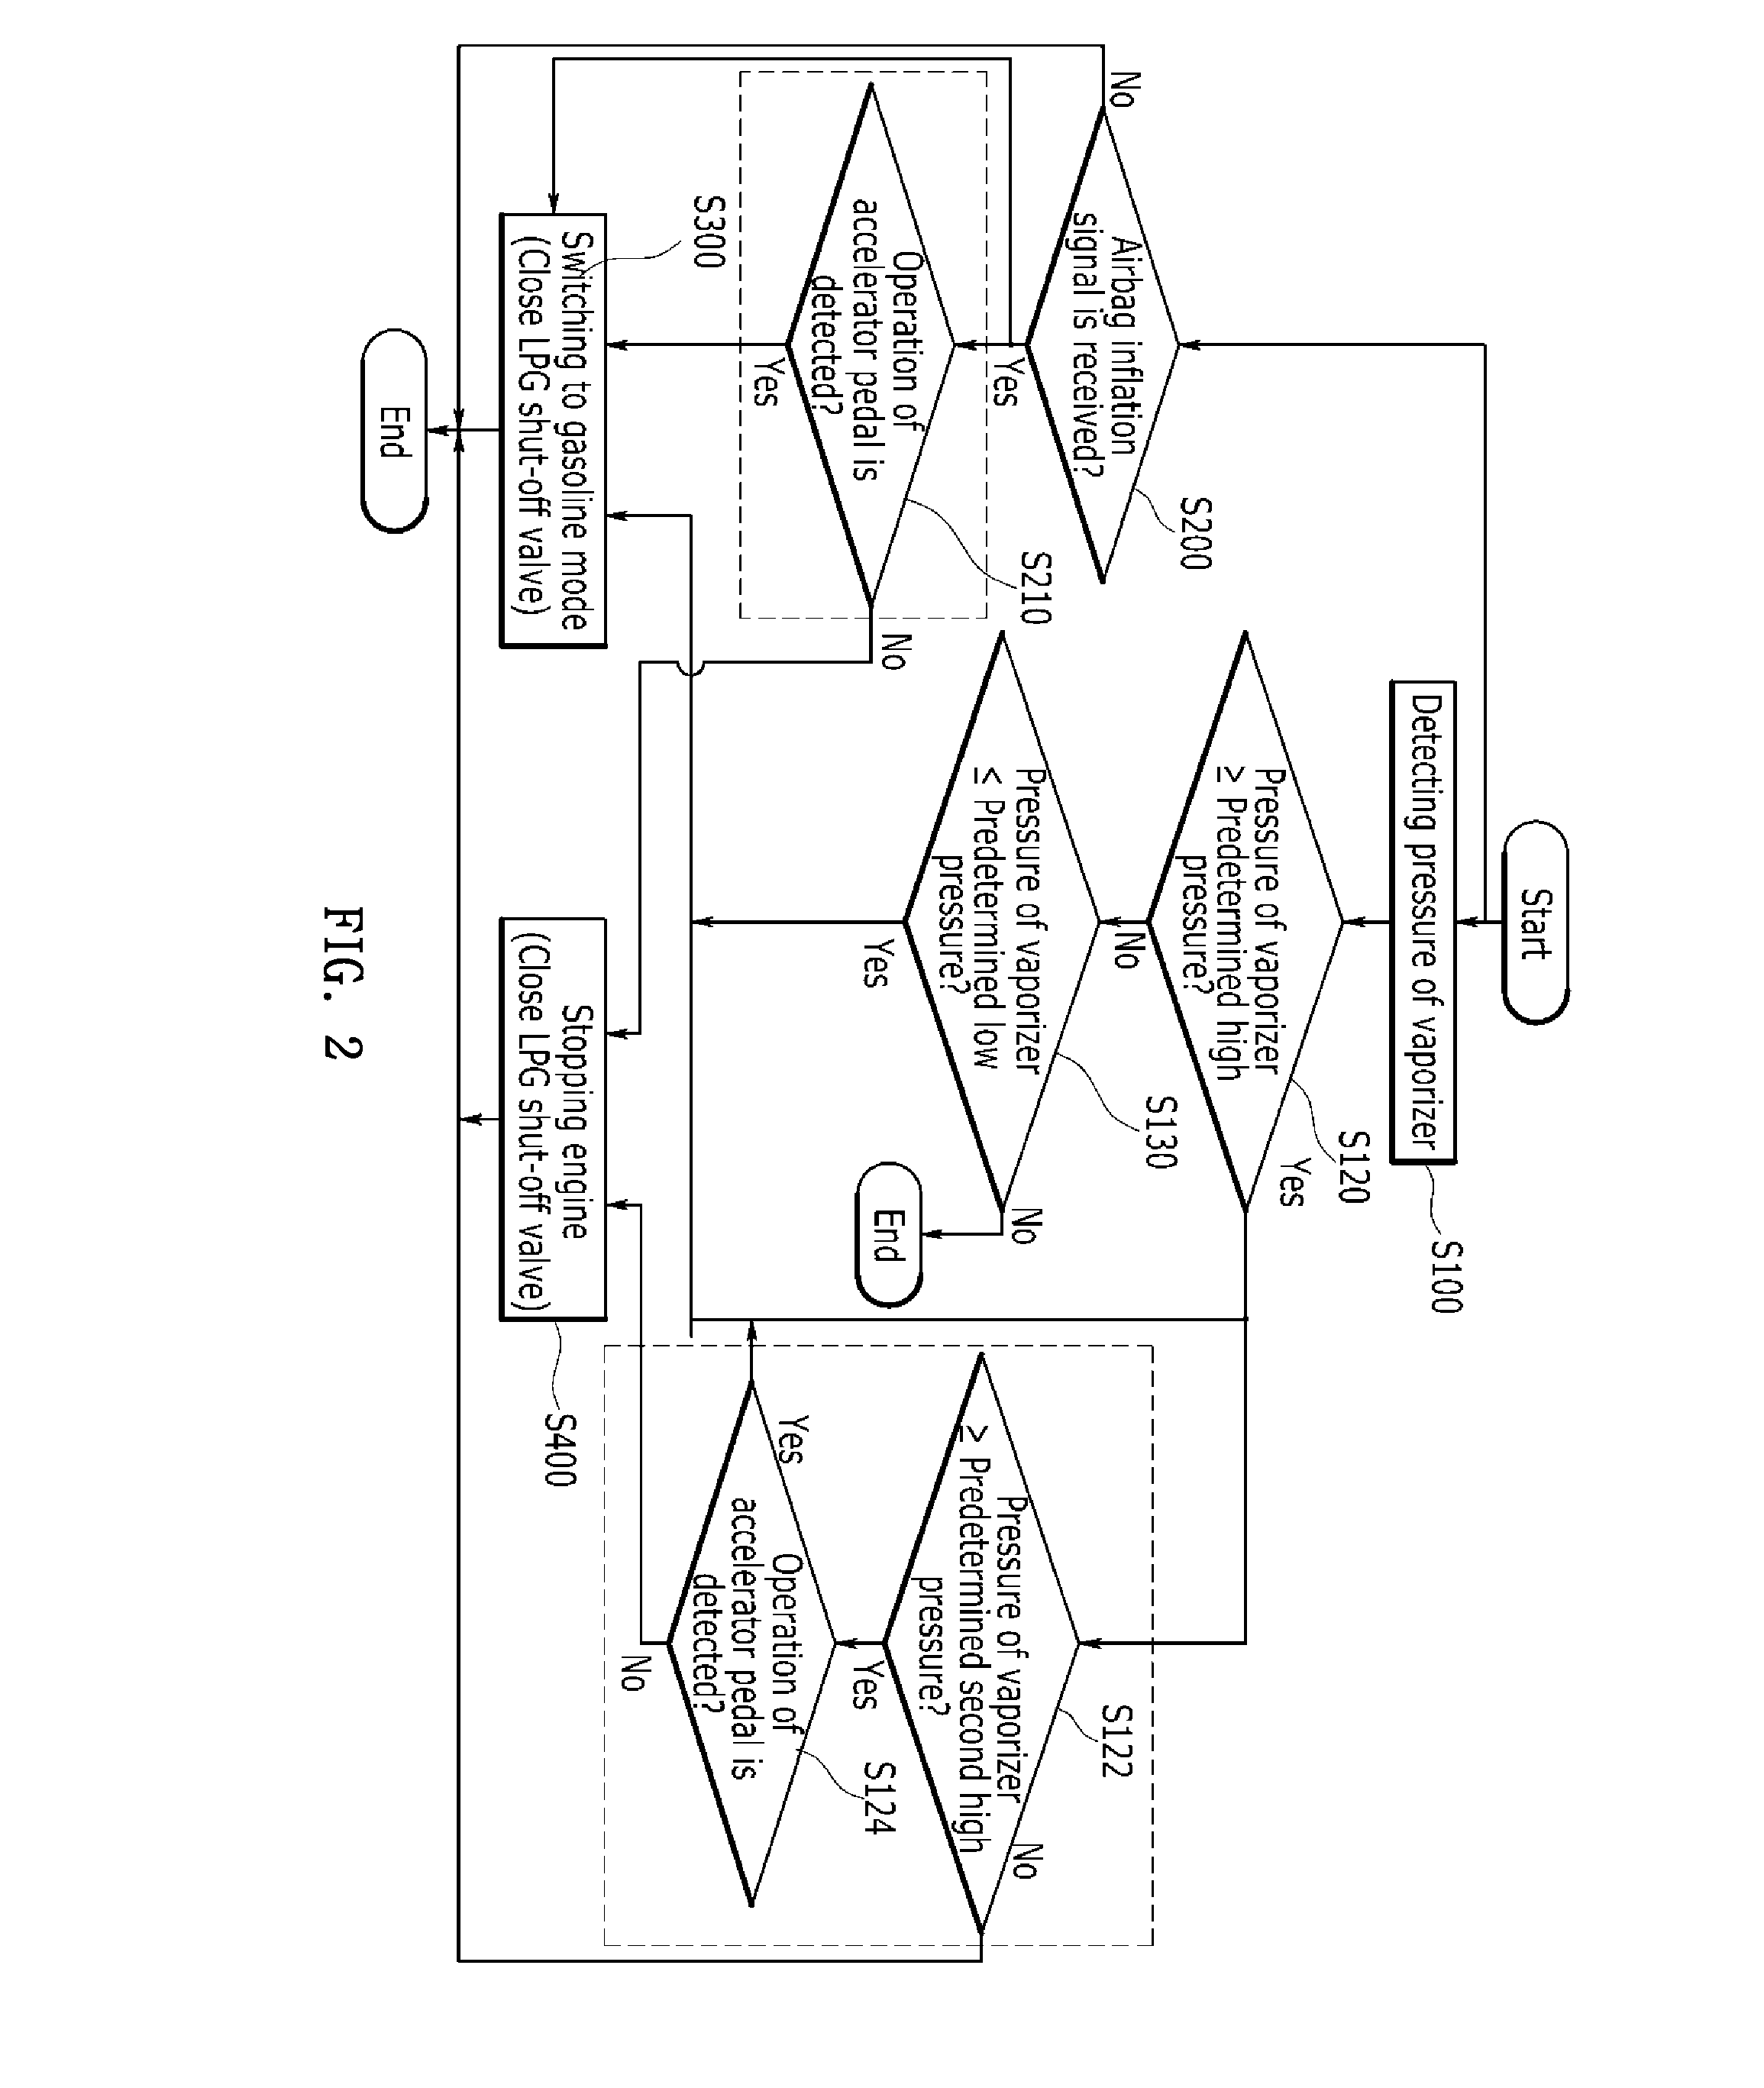 Method and system for controlling safety of a bi-fuel vehicle